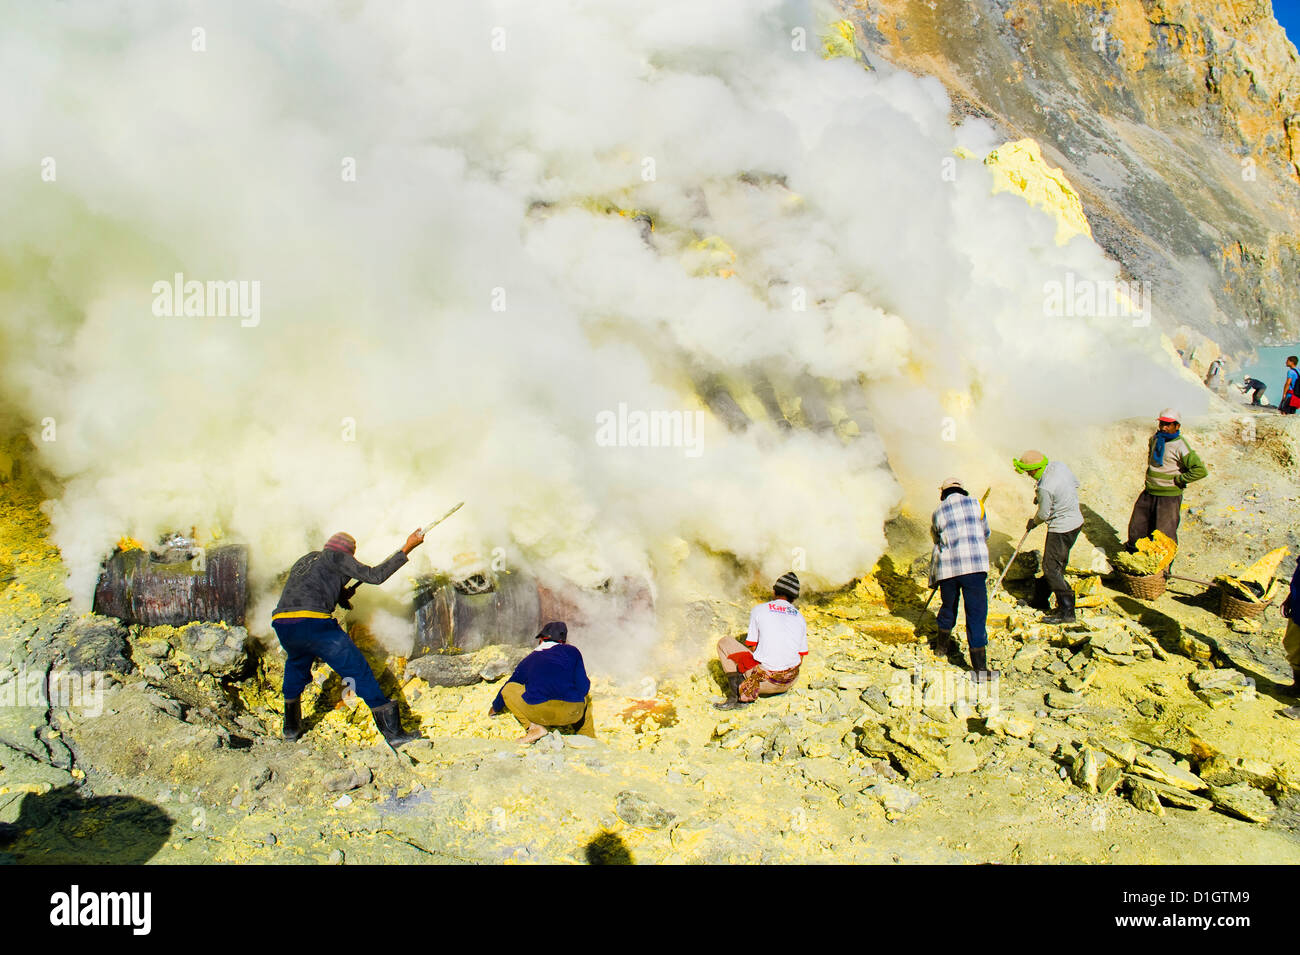 Sulphur miners working in the crater at Kawah Ijen, Java, Indonesia, Southeast Asia, Asia Stock Photo